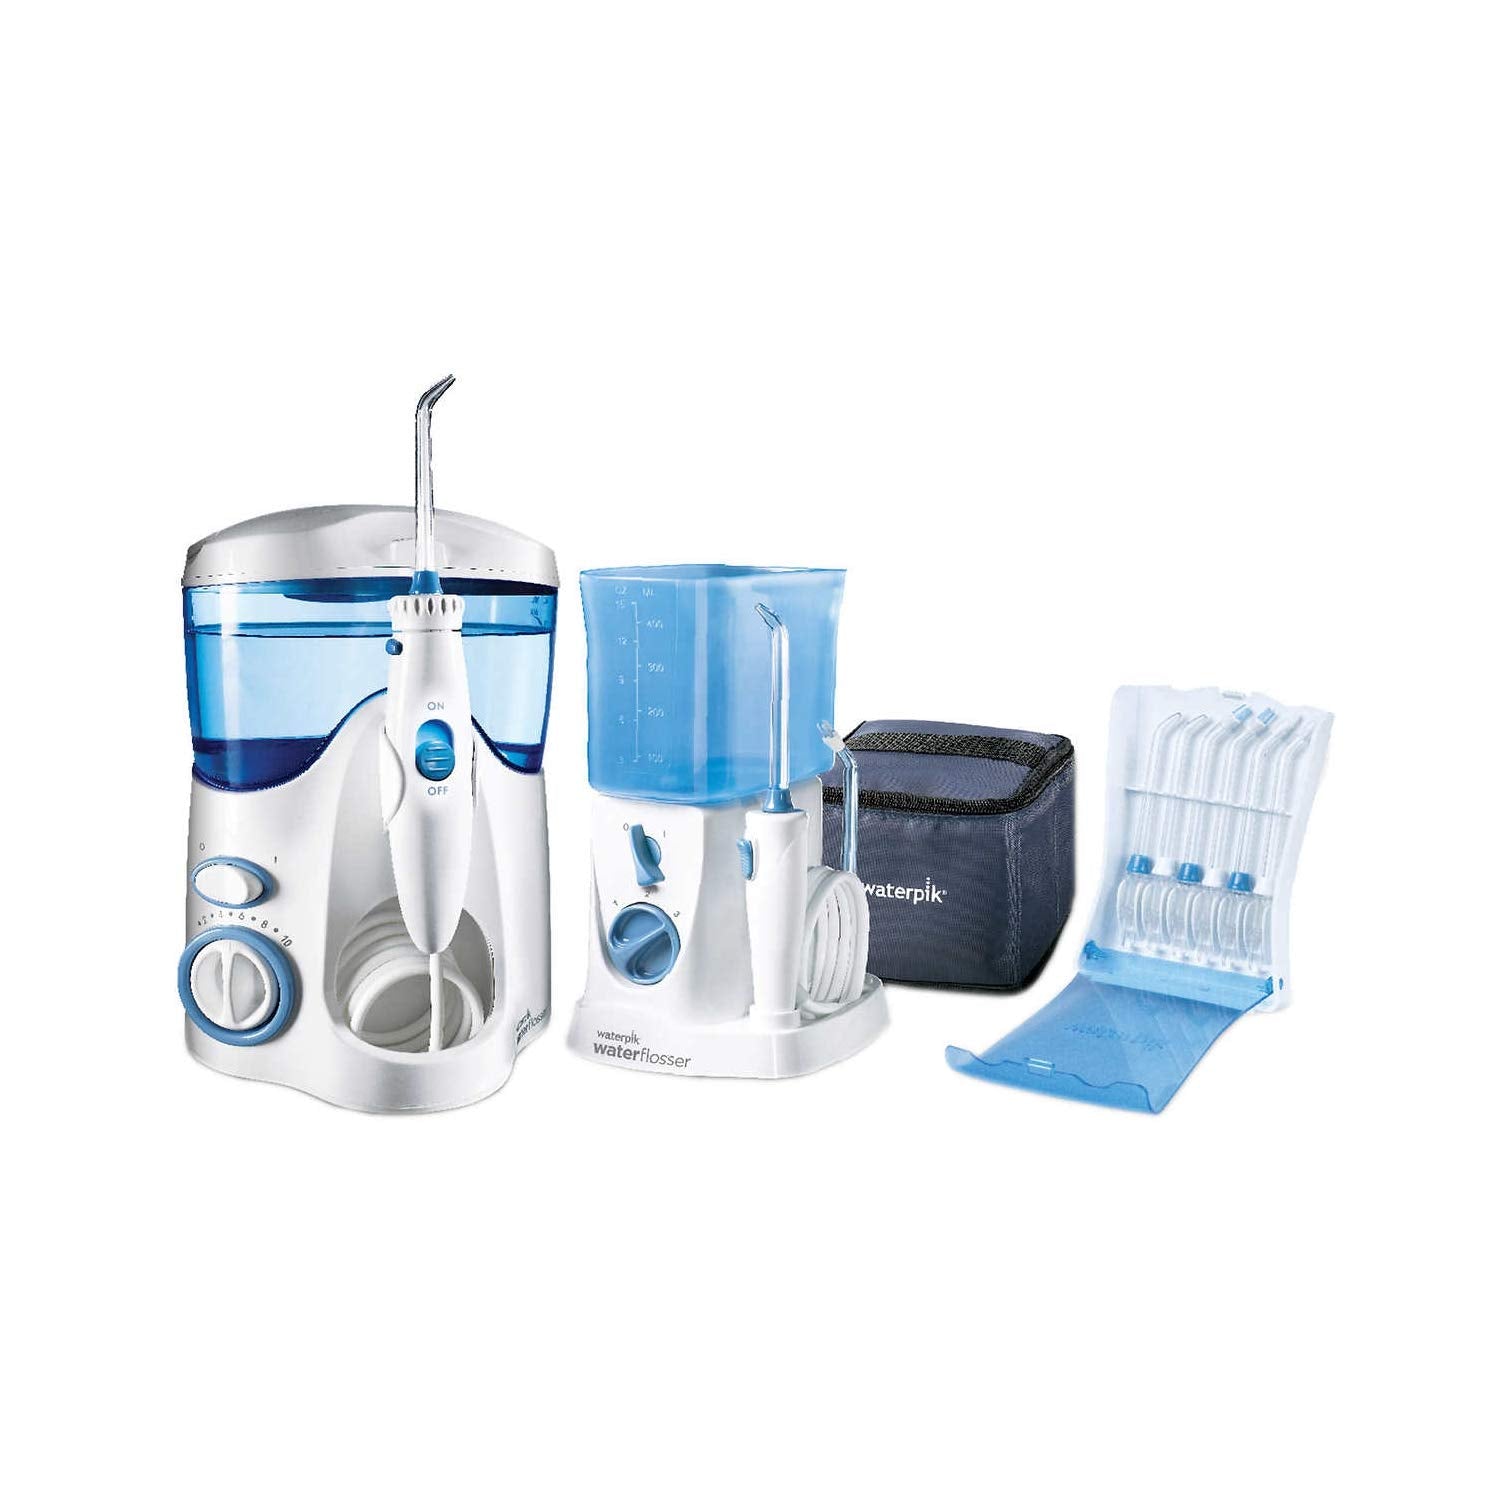 Waterpik Water Flosser and Nano Water Flosser Combo: The Perfect Way to Improve Your Oral Health